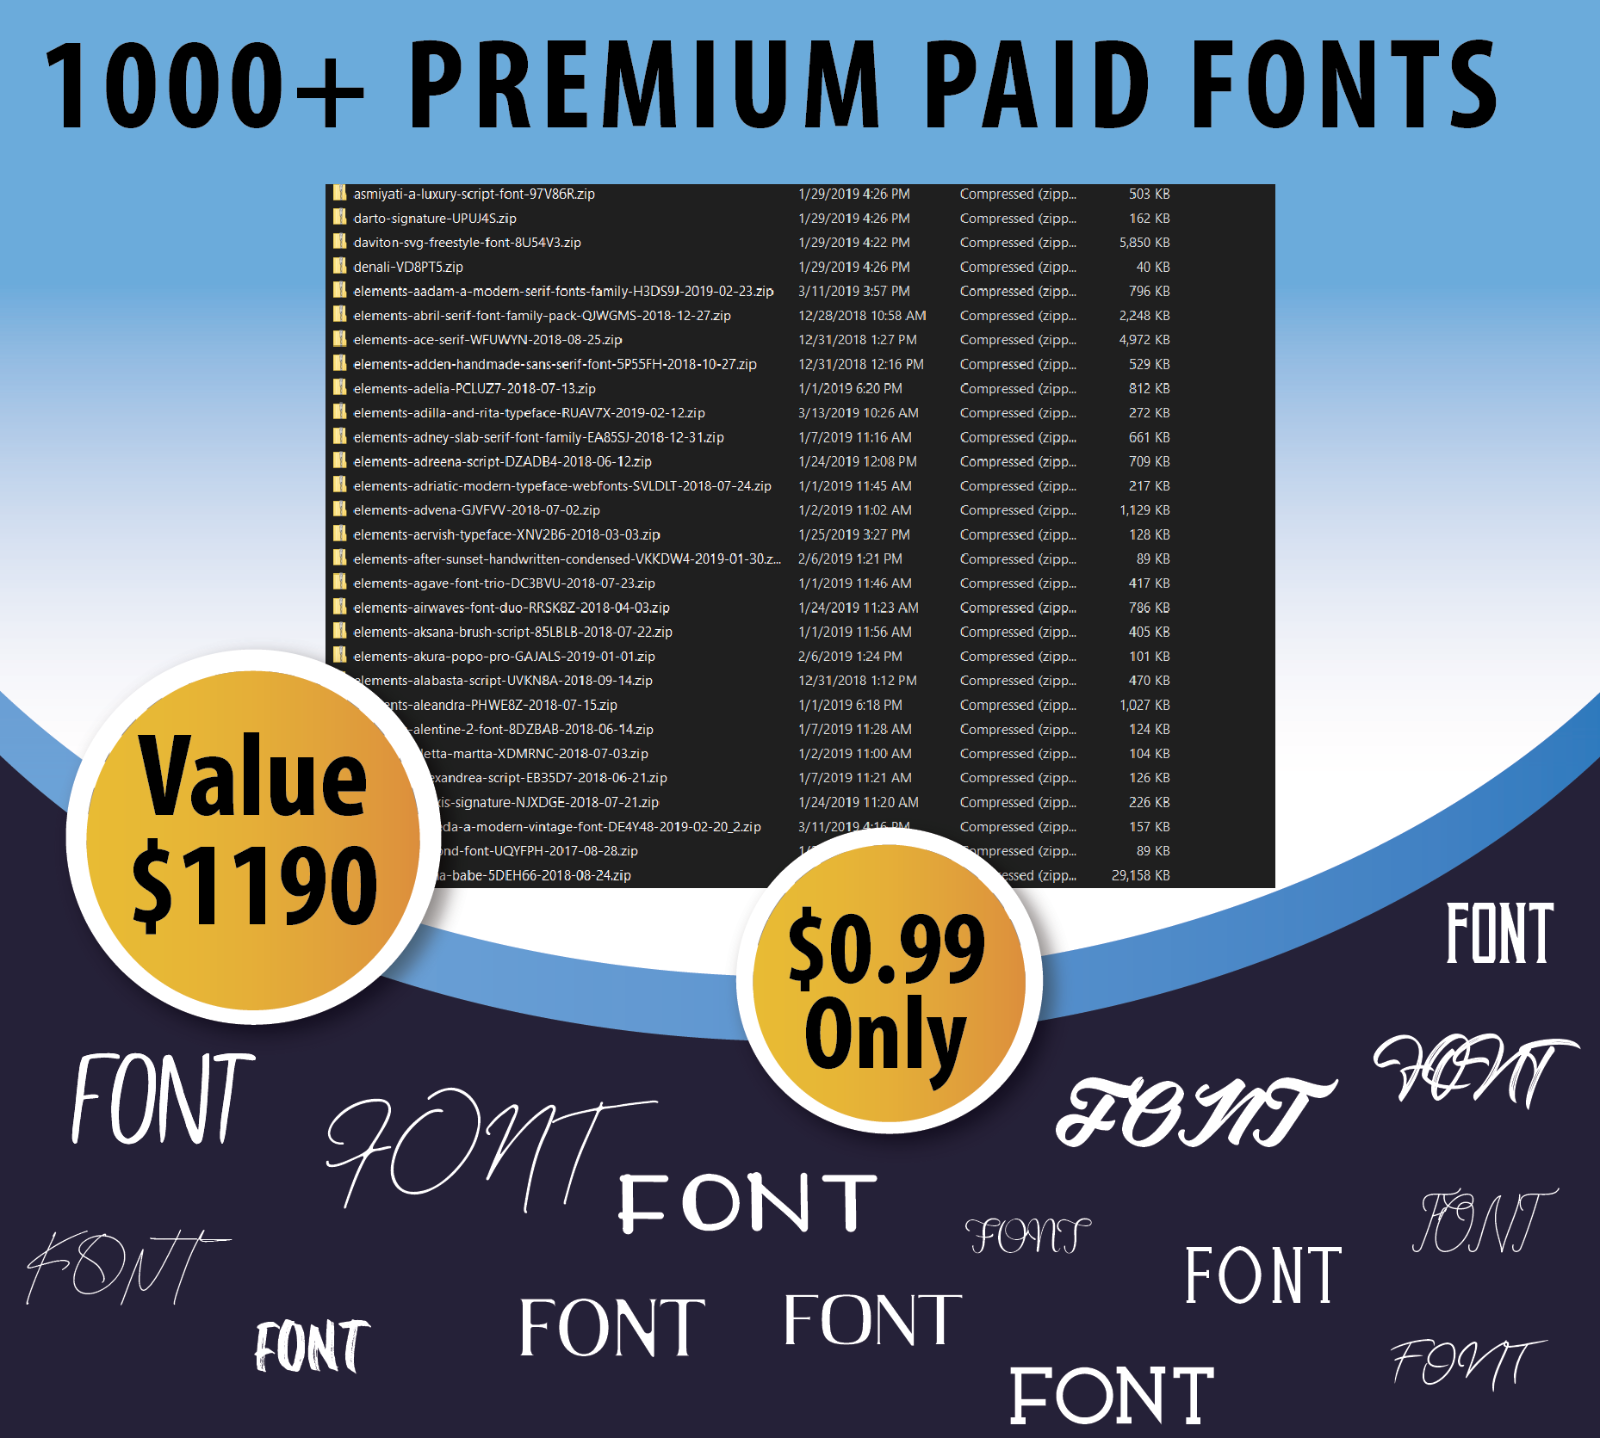 1000+ Premium Paid Fonts Value Over $1100+ Only $0.99 For Your Website Fast Ship